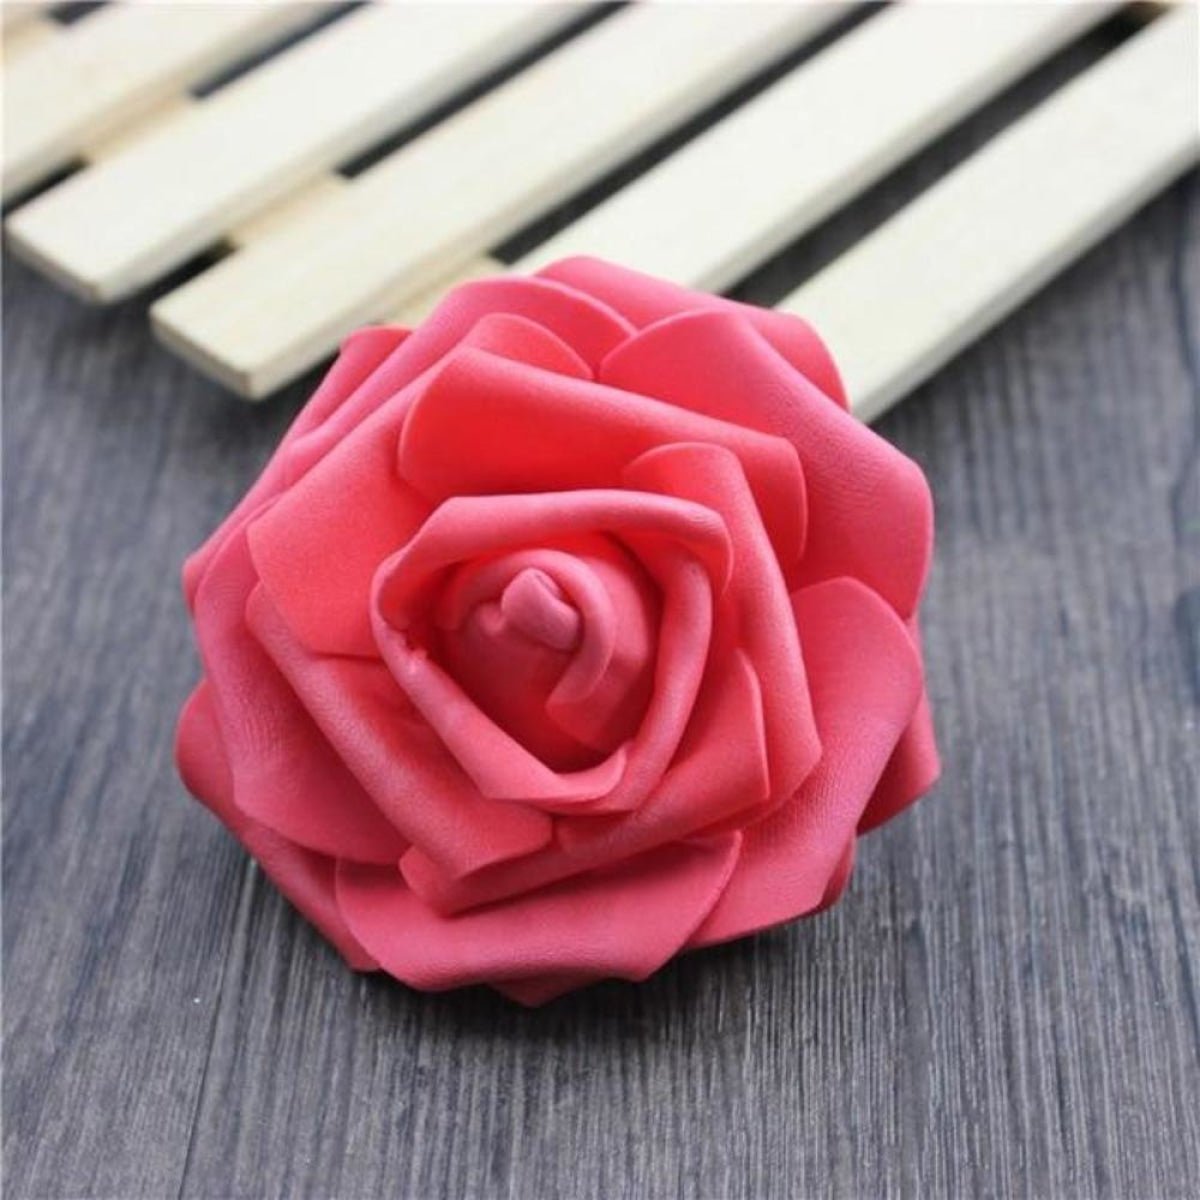 7.5cm Artificial Fake Flowers Foam Rose Head For Wedding Decorations DIY Wreaths - 38pcs Red - Asia Sell